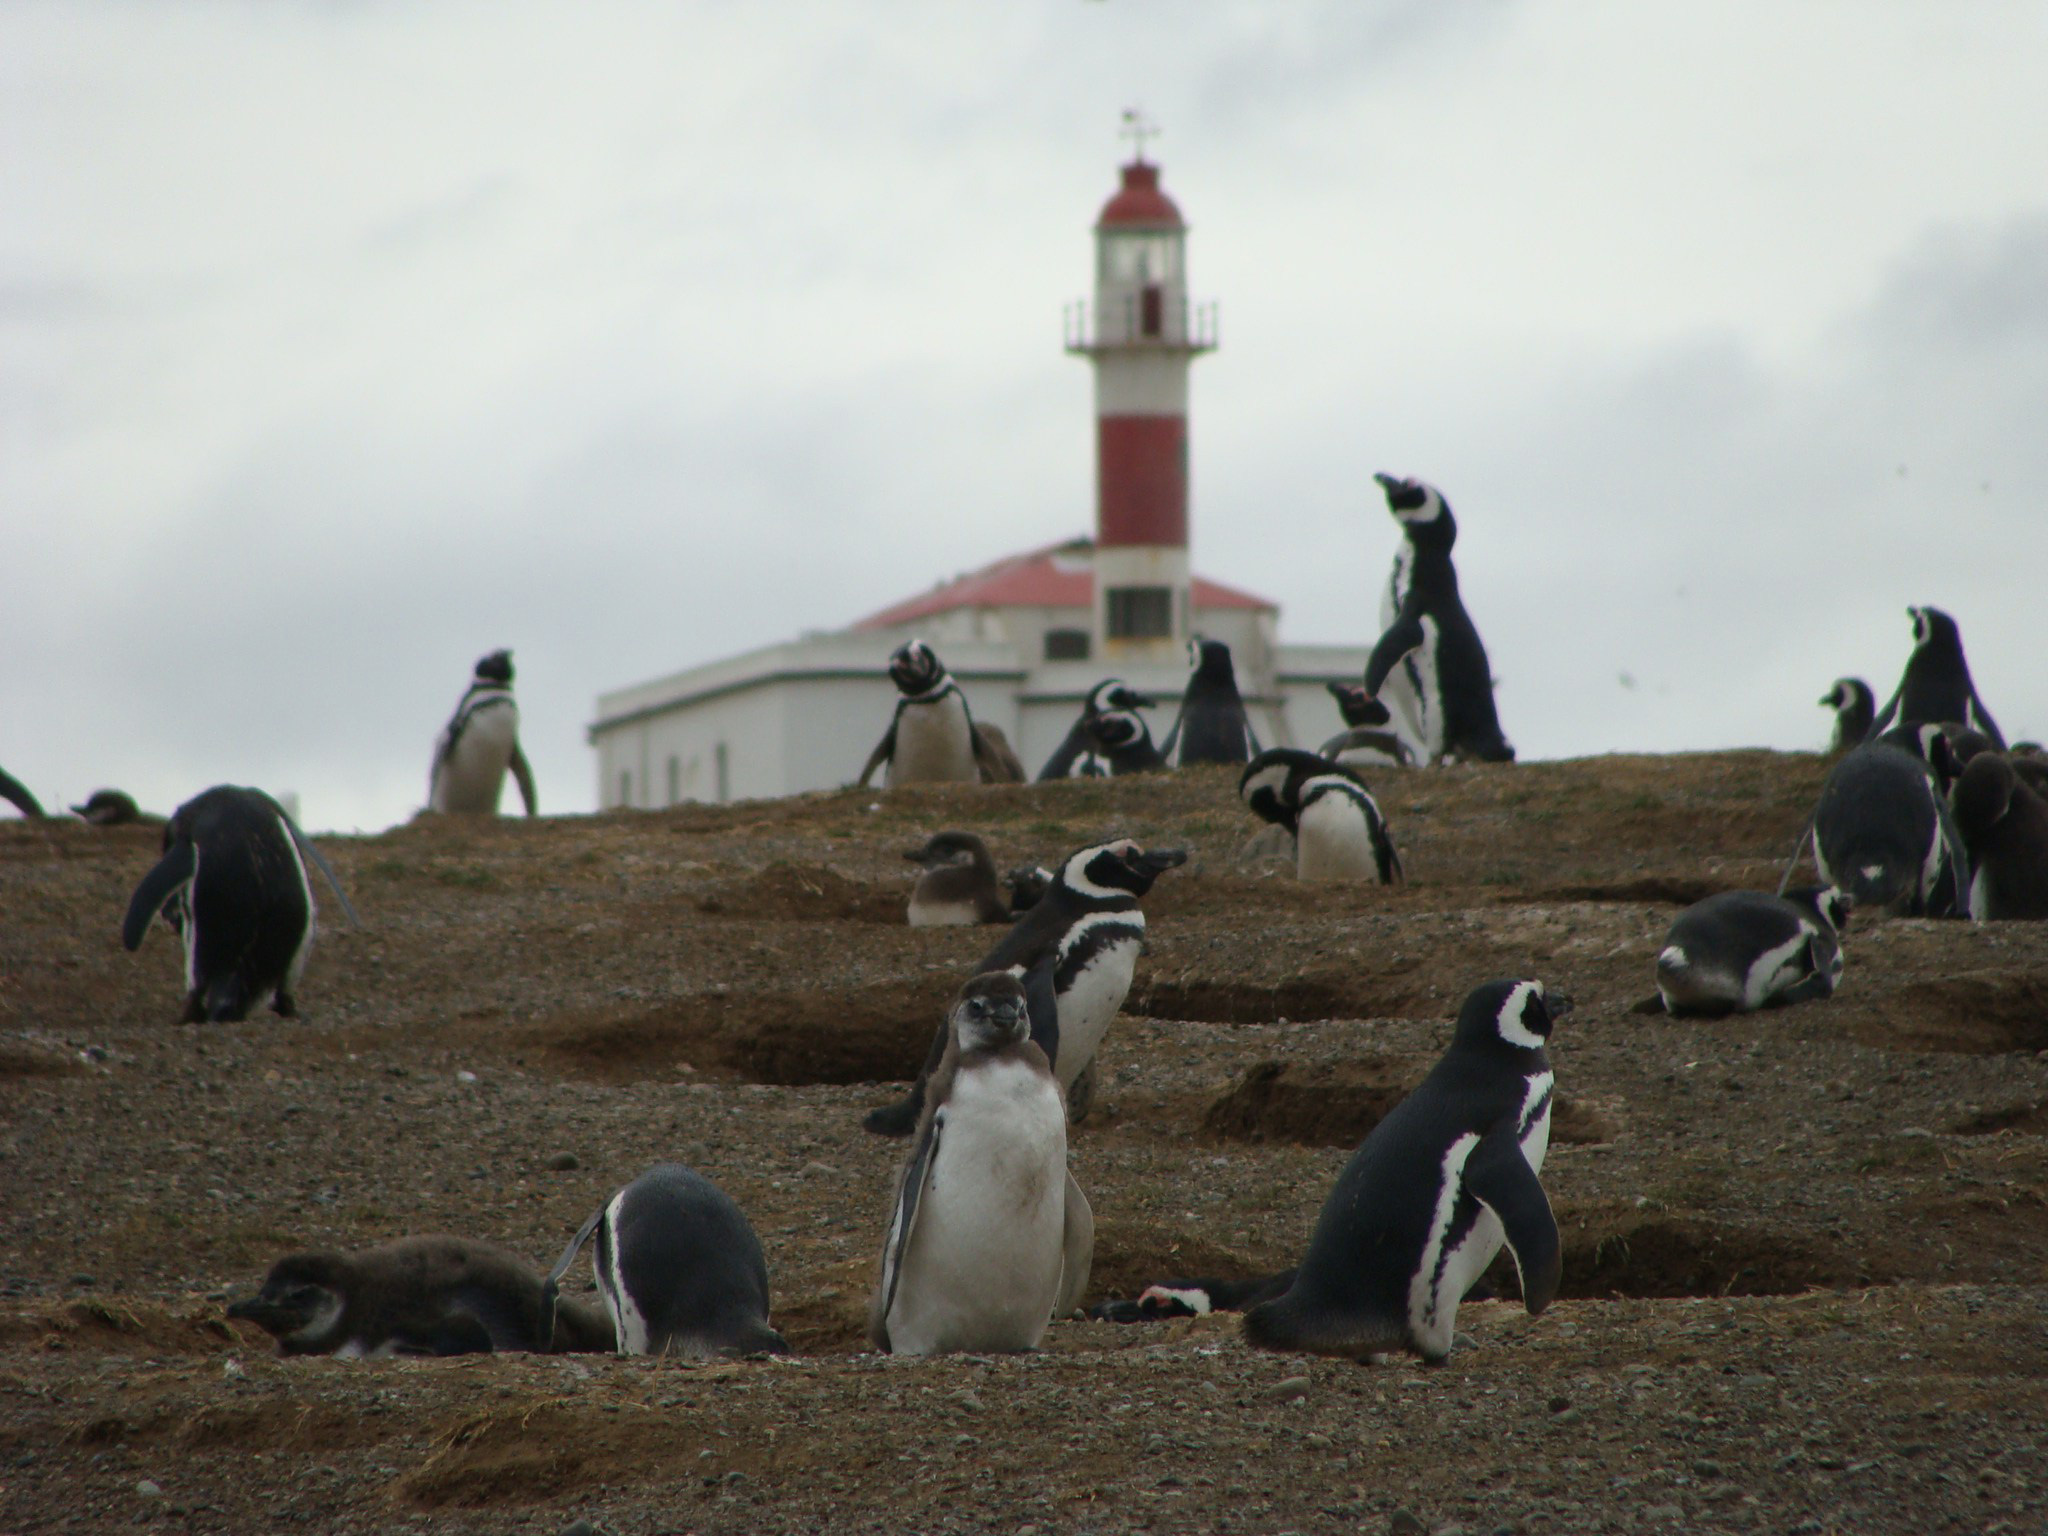 Encounter with penguins from Puerto Natales